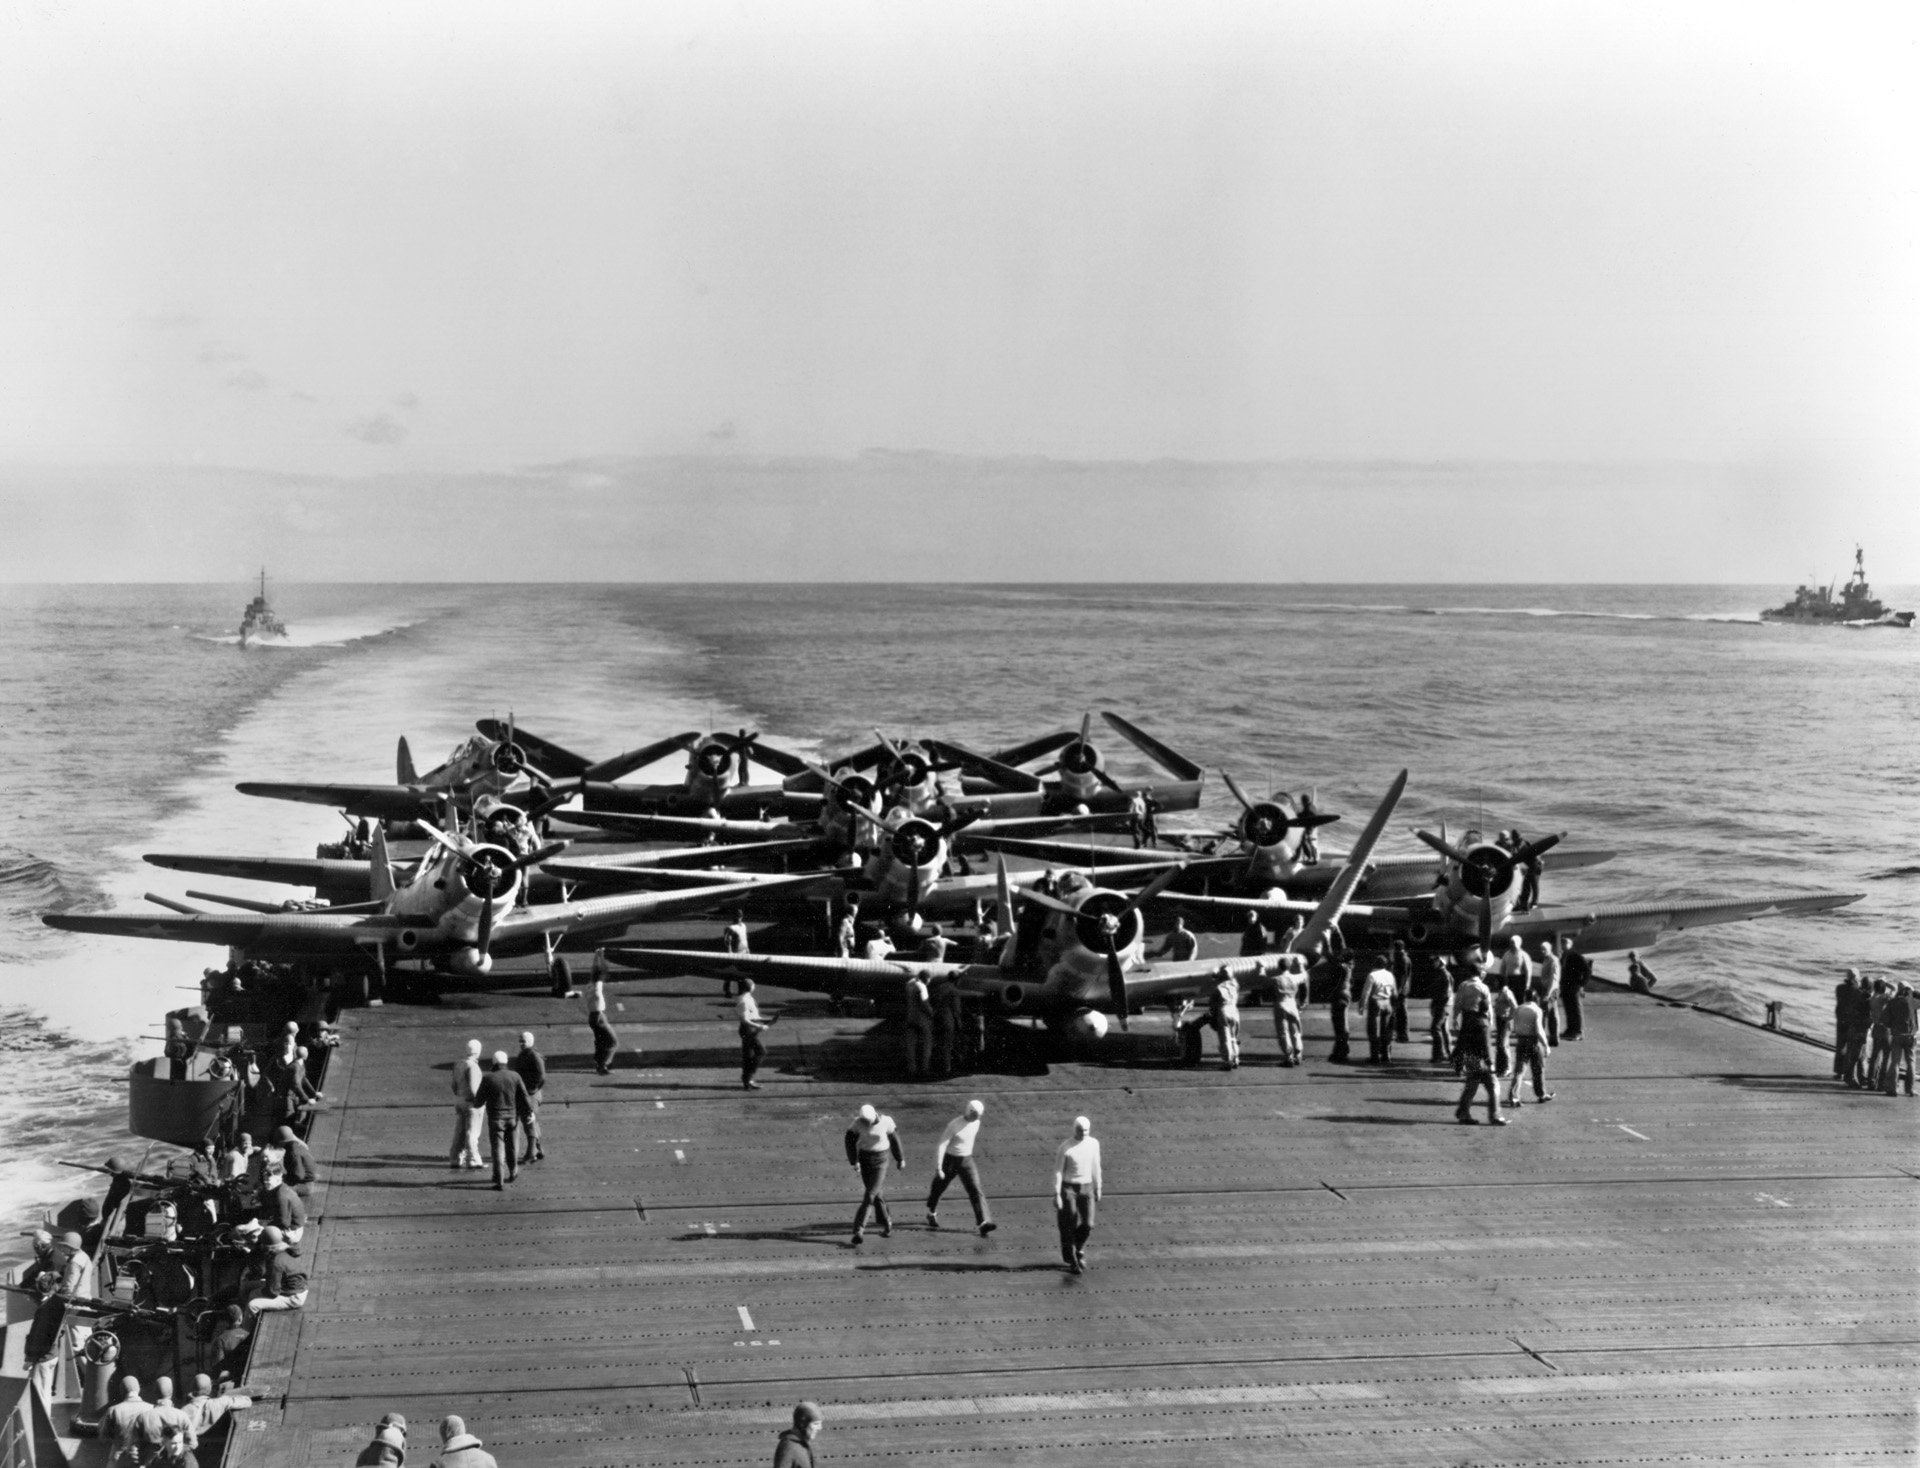 Douglas TBD Devastator torpedo bombers crowd the flight deck of the aircraft carrier USS Enterprise in preparation for takeoff on the morning of June 4, during the battle. These aircraft of Torpedo Squadron 6 (VT-6) were launched moments later, with nine of the 14 Devastators lost during attacks against the Japanese fleet.